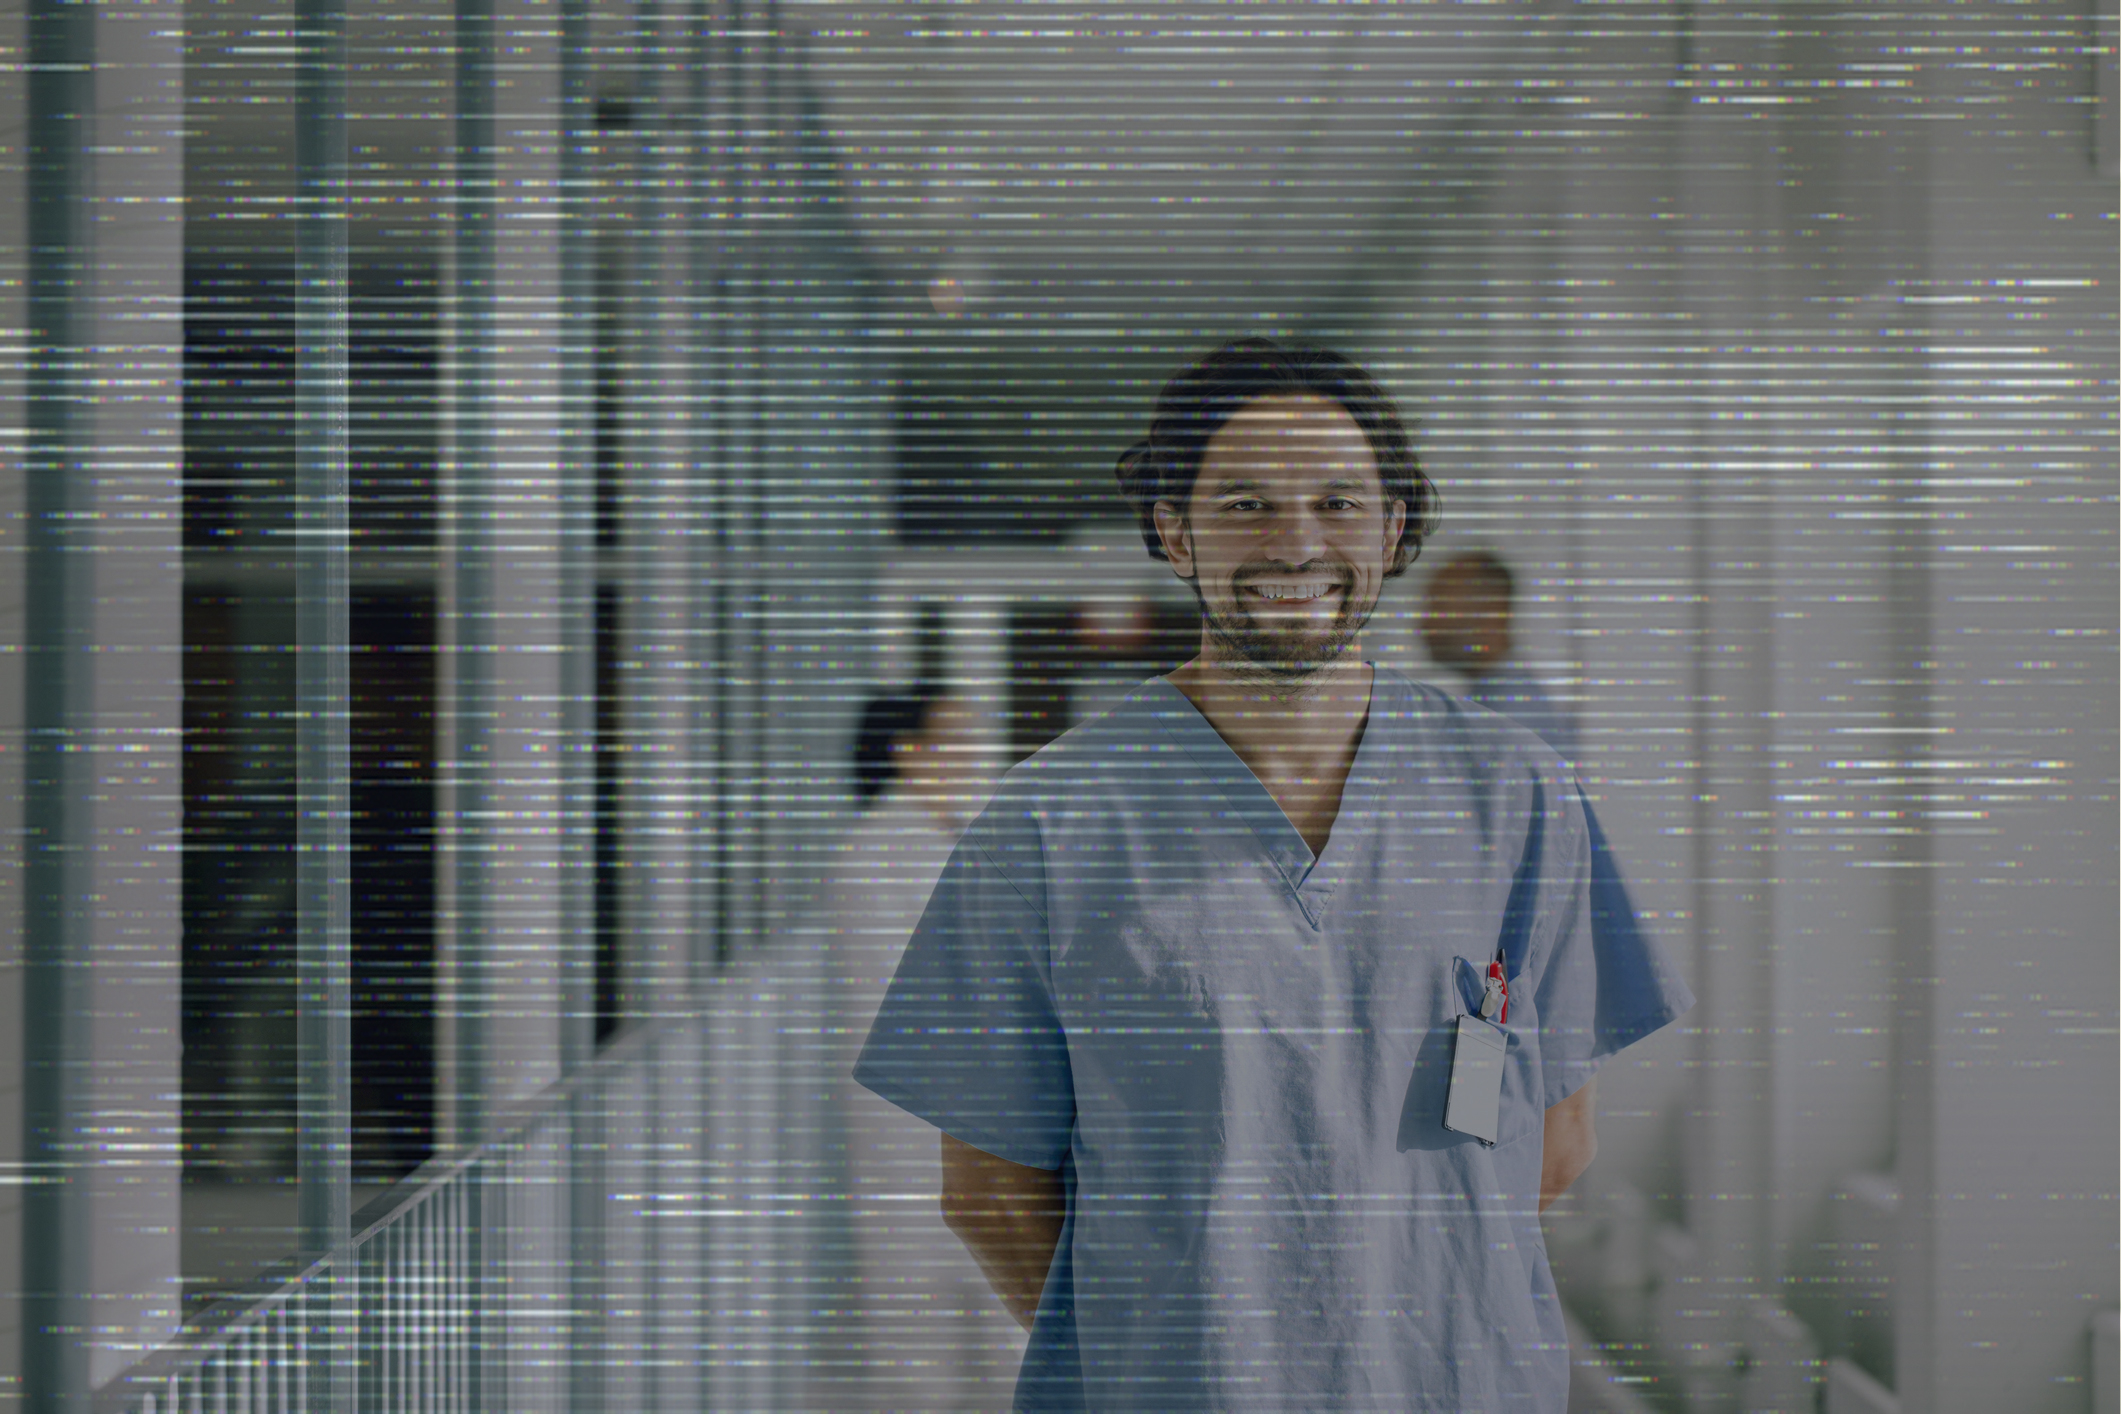 A person in hospital scrubs standing in a hallway and smiling